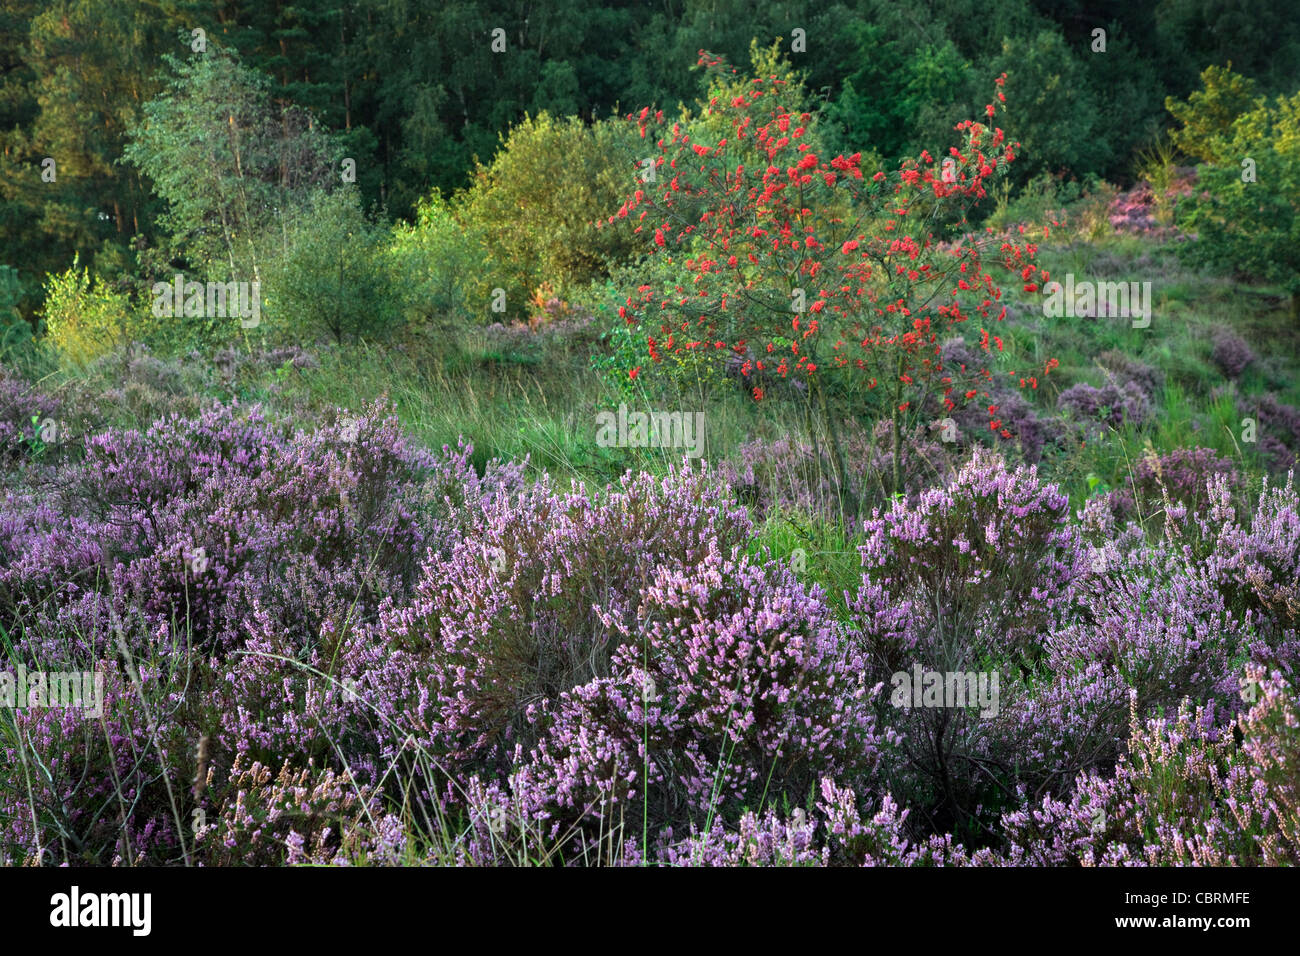 Rowan carrying red berries and heather flowering in purple heathland at the Hoge Kempen National Park, Belgium Stock Photo